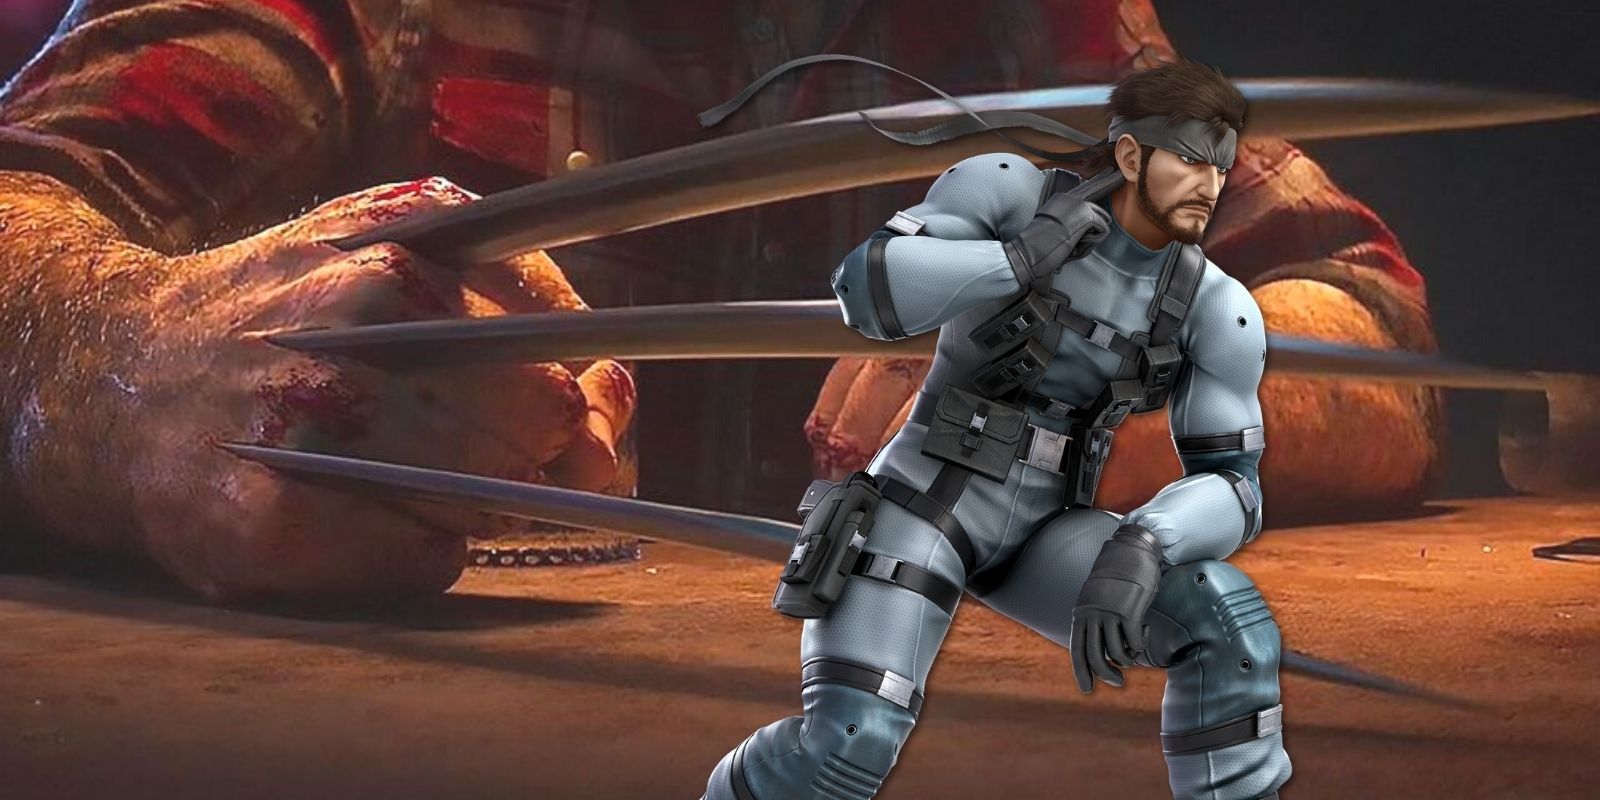 Solid Snake from Metal Gear Solid alongside Wolverine's claws